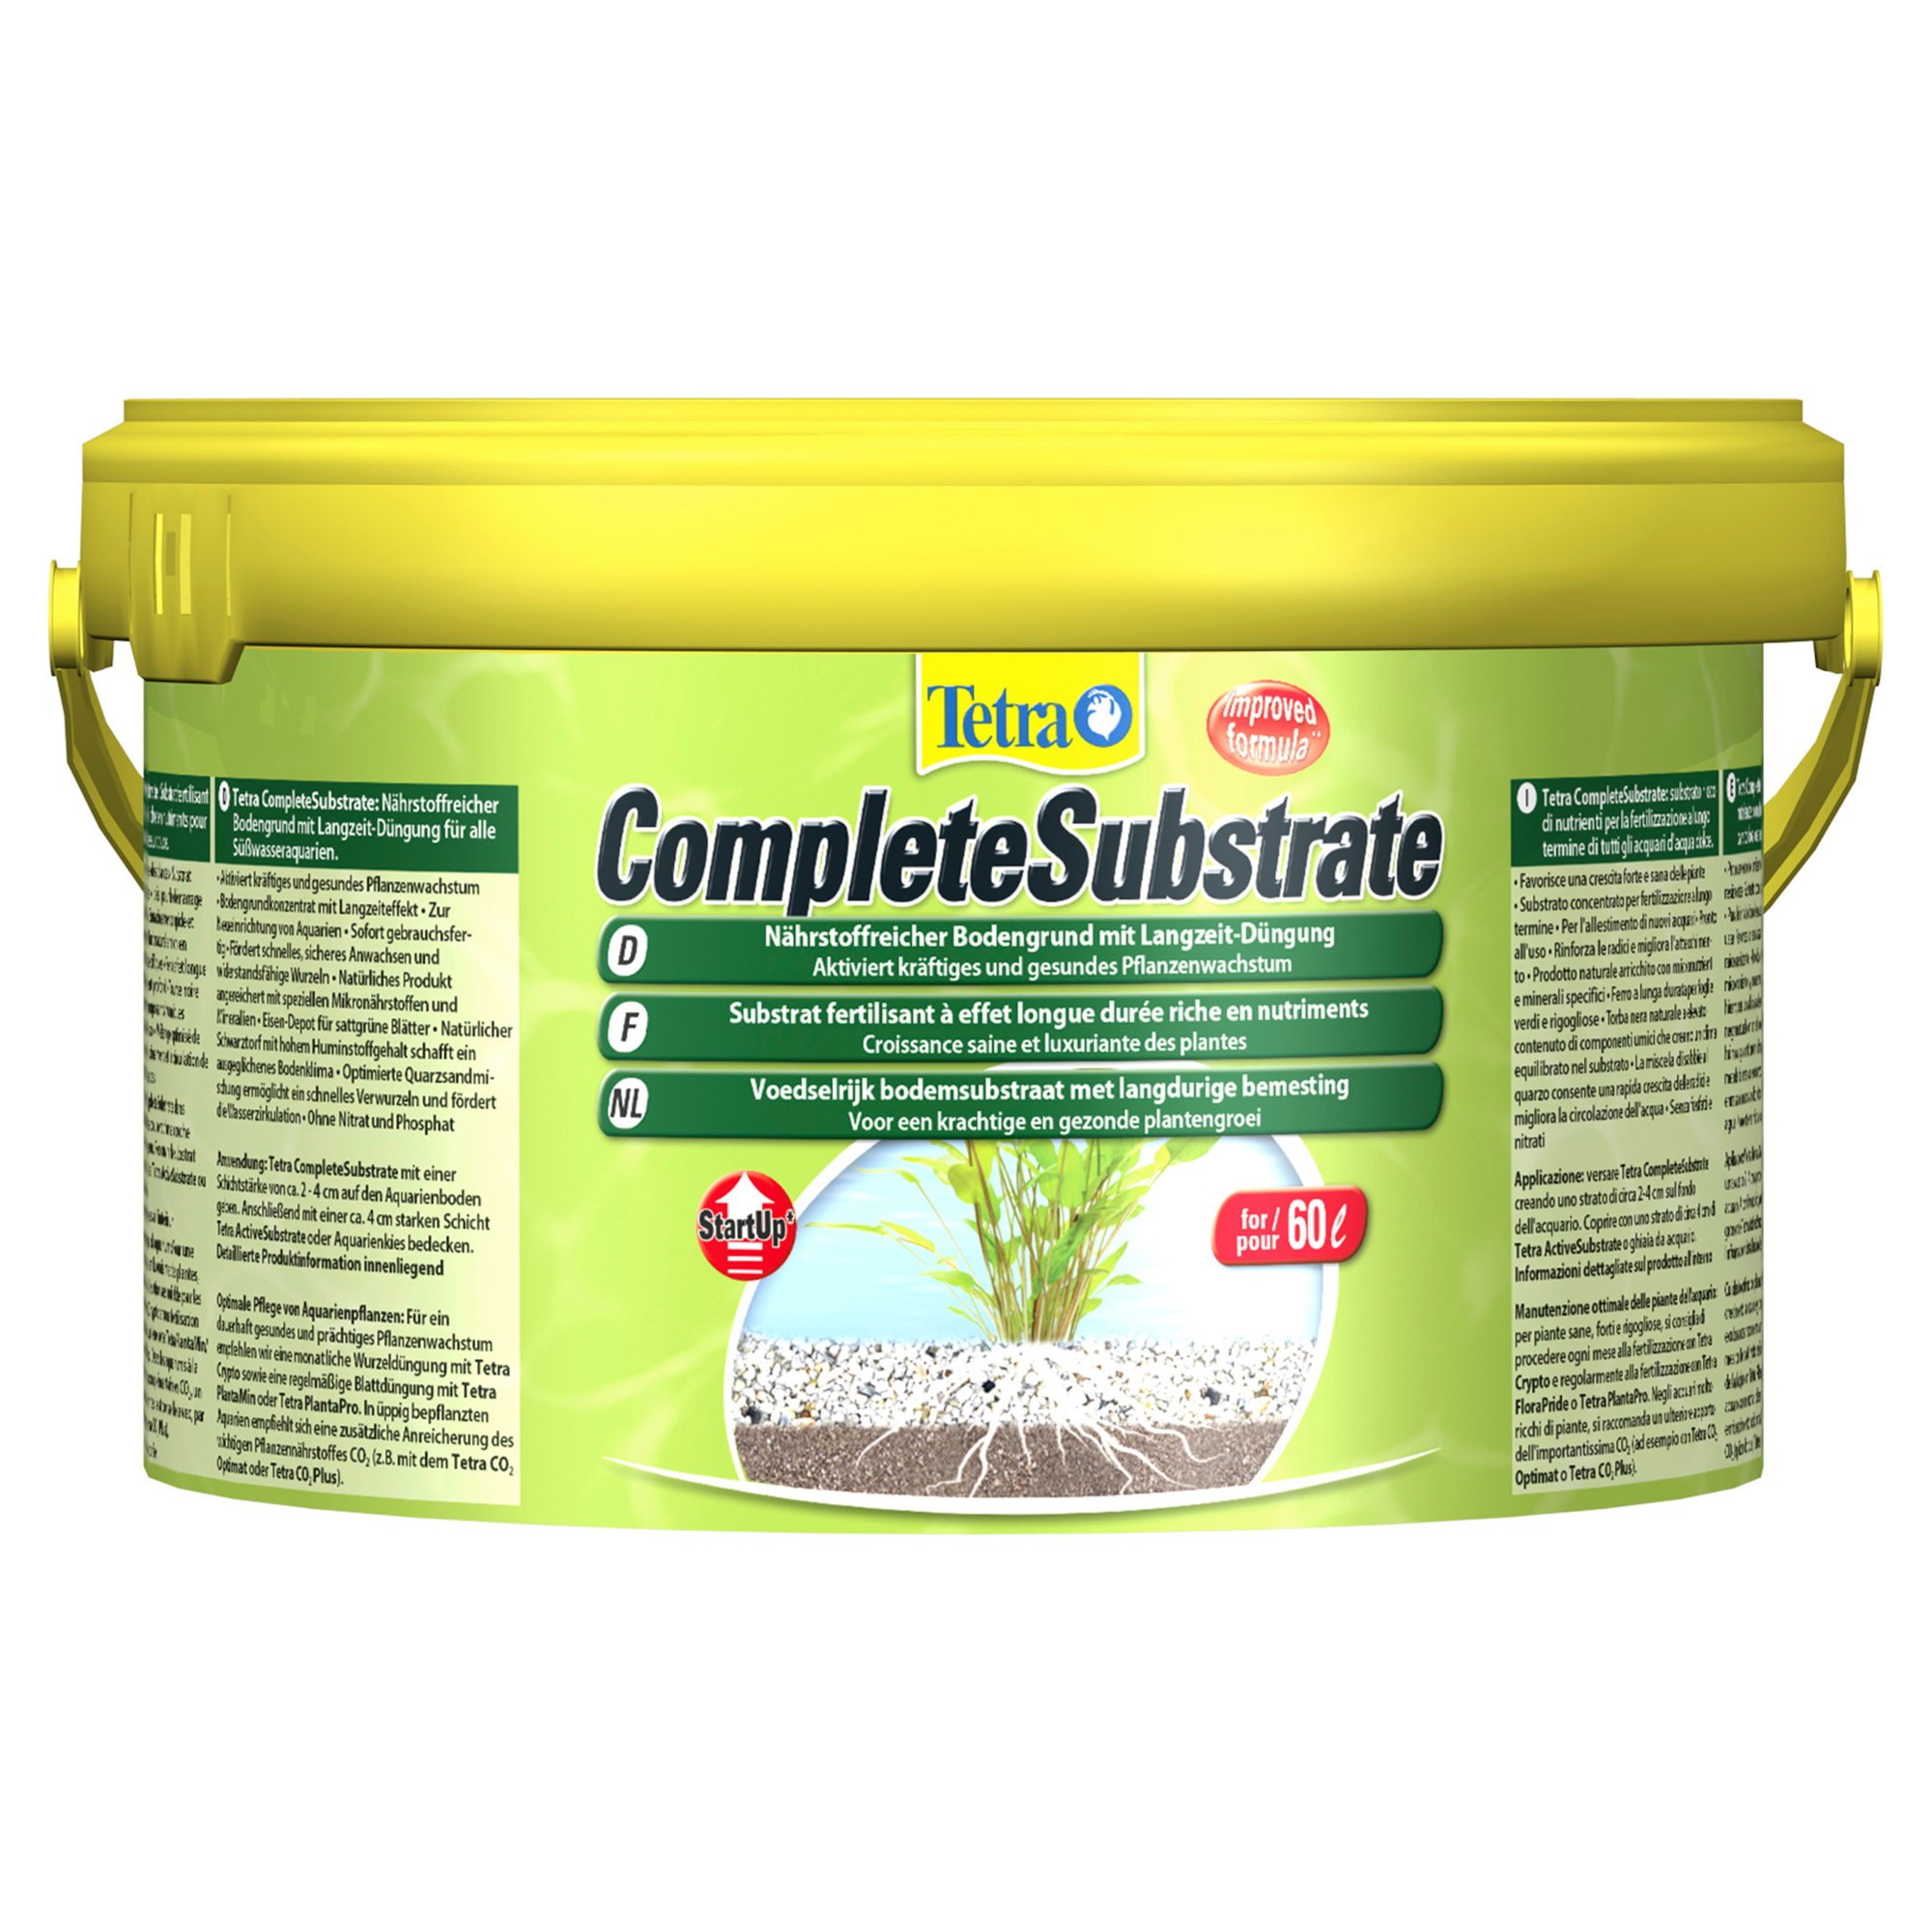 Bodengrund Complete Substrate 2,5 kg + product picture